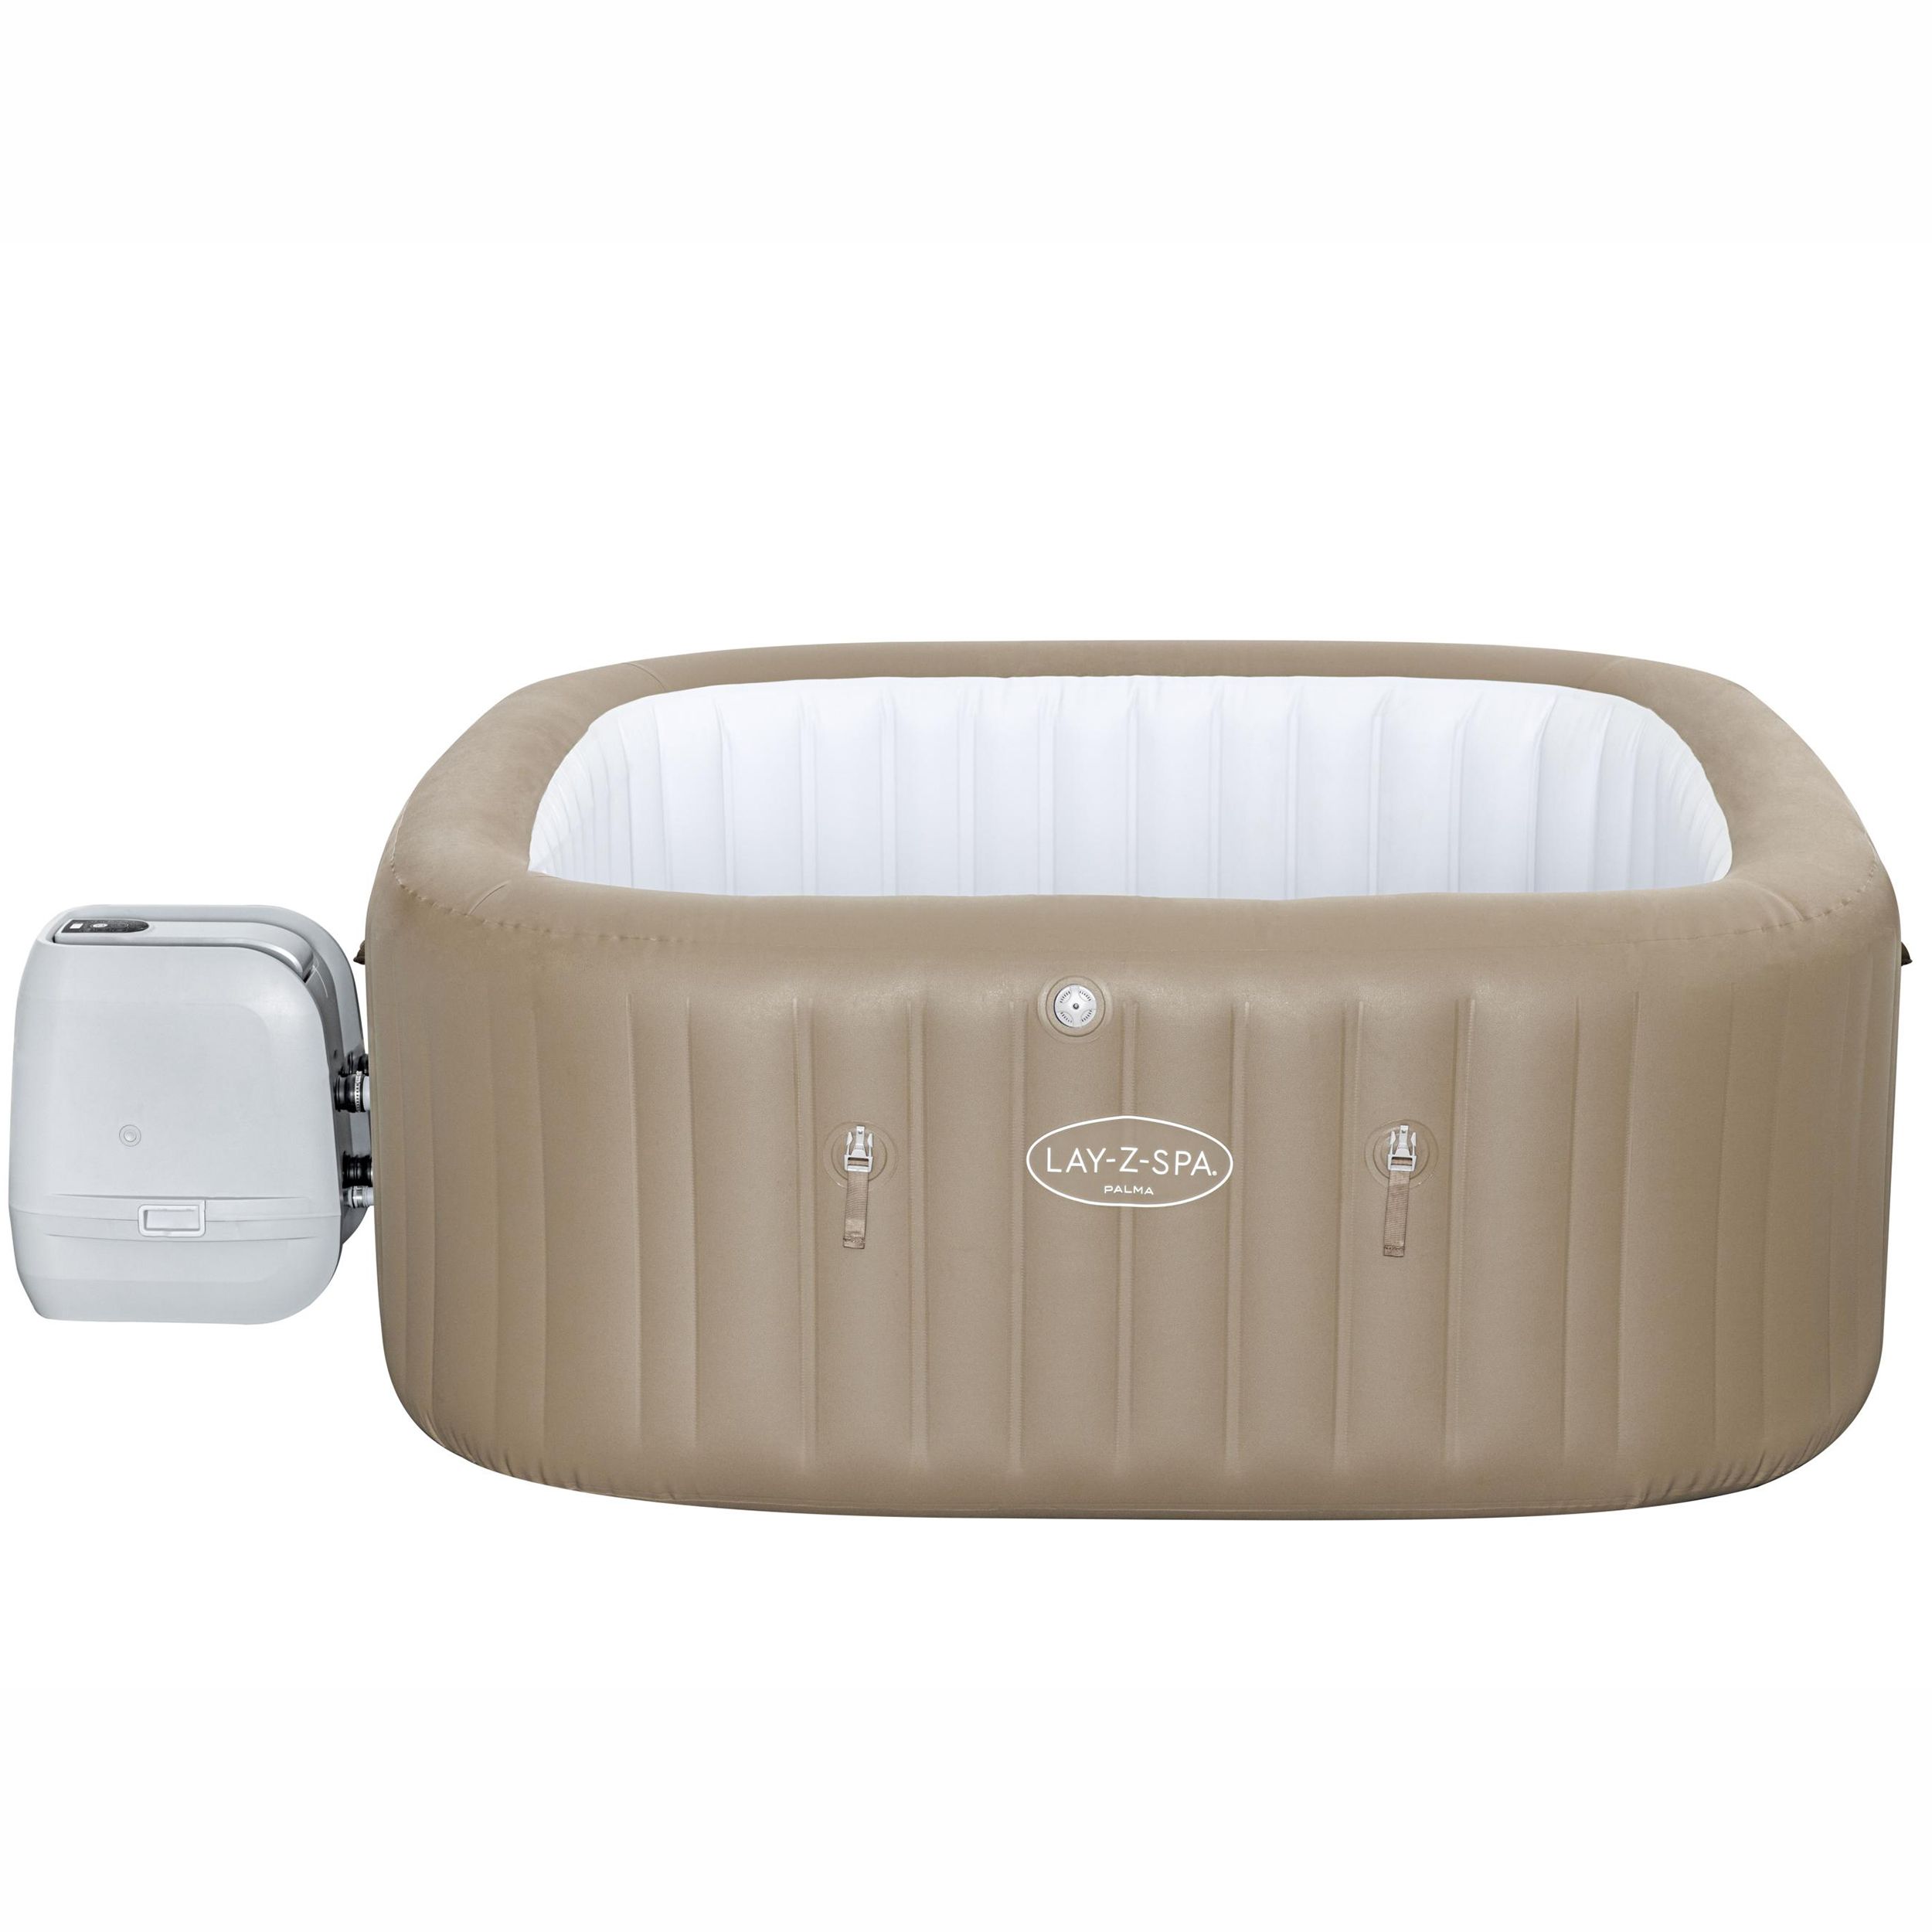 Lay-Z-Spa Palma Hydrojet Inflatable Hot Tub